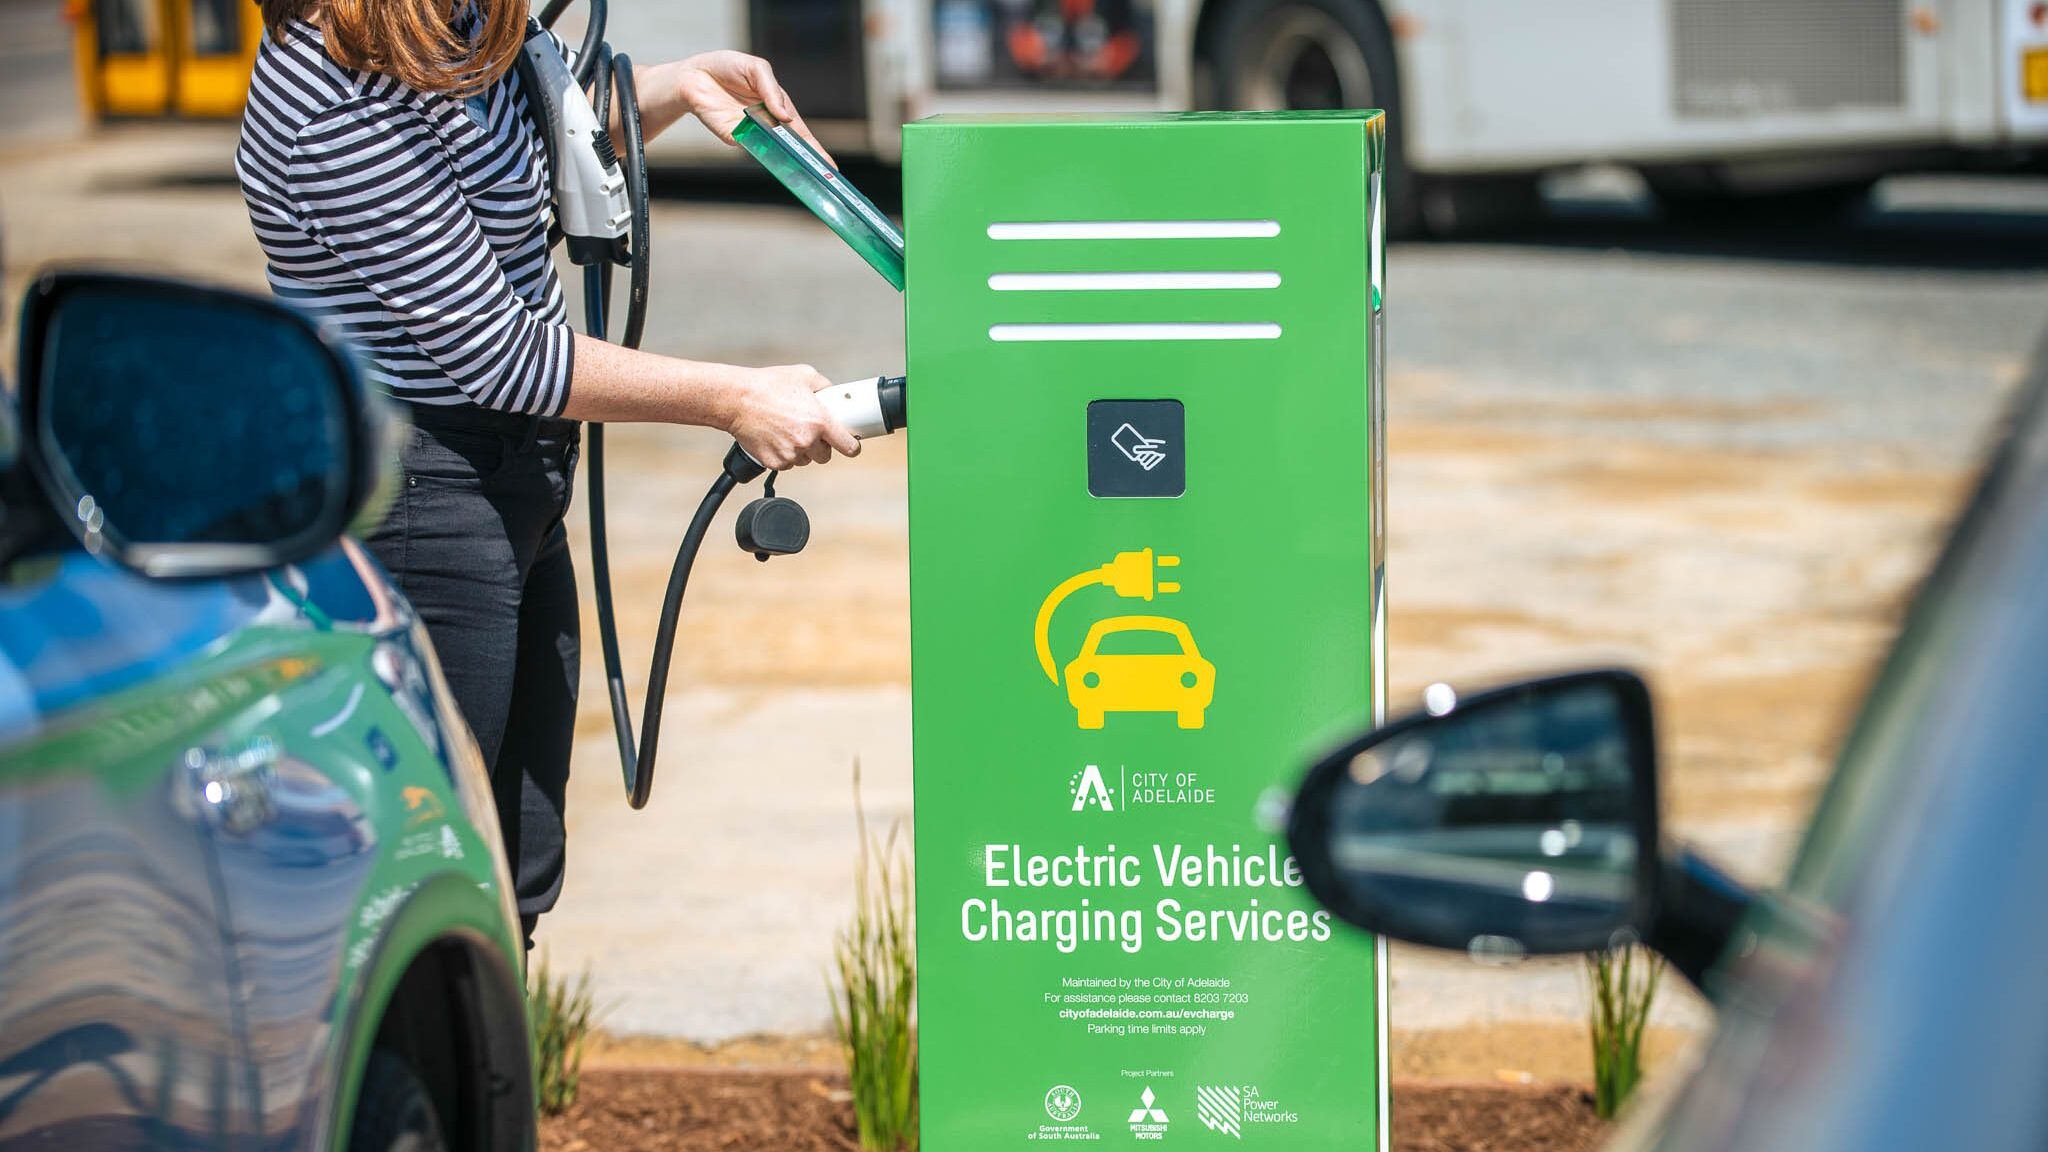 South Australians want EVs but government’s new tax would suppress demand